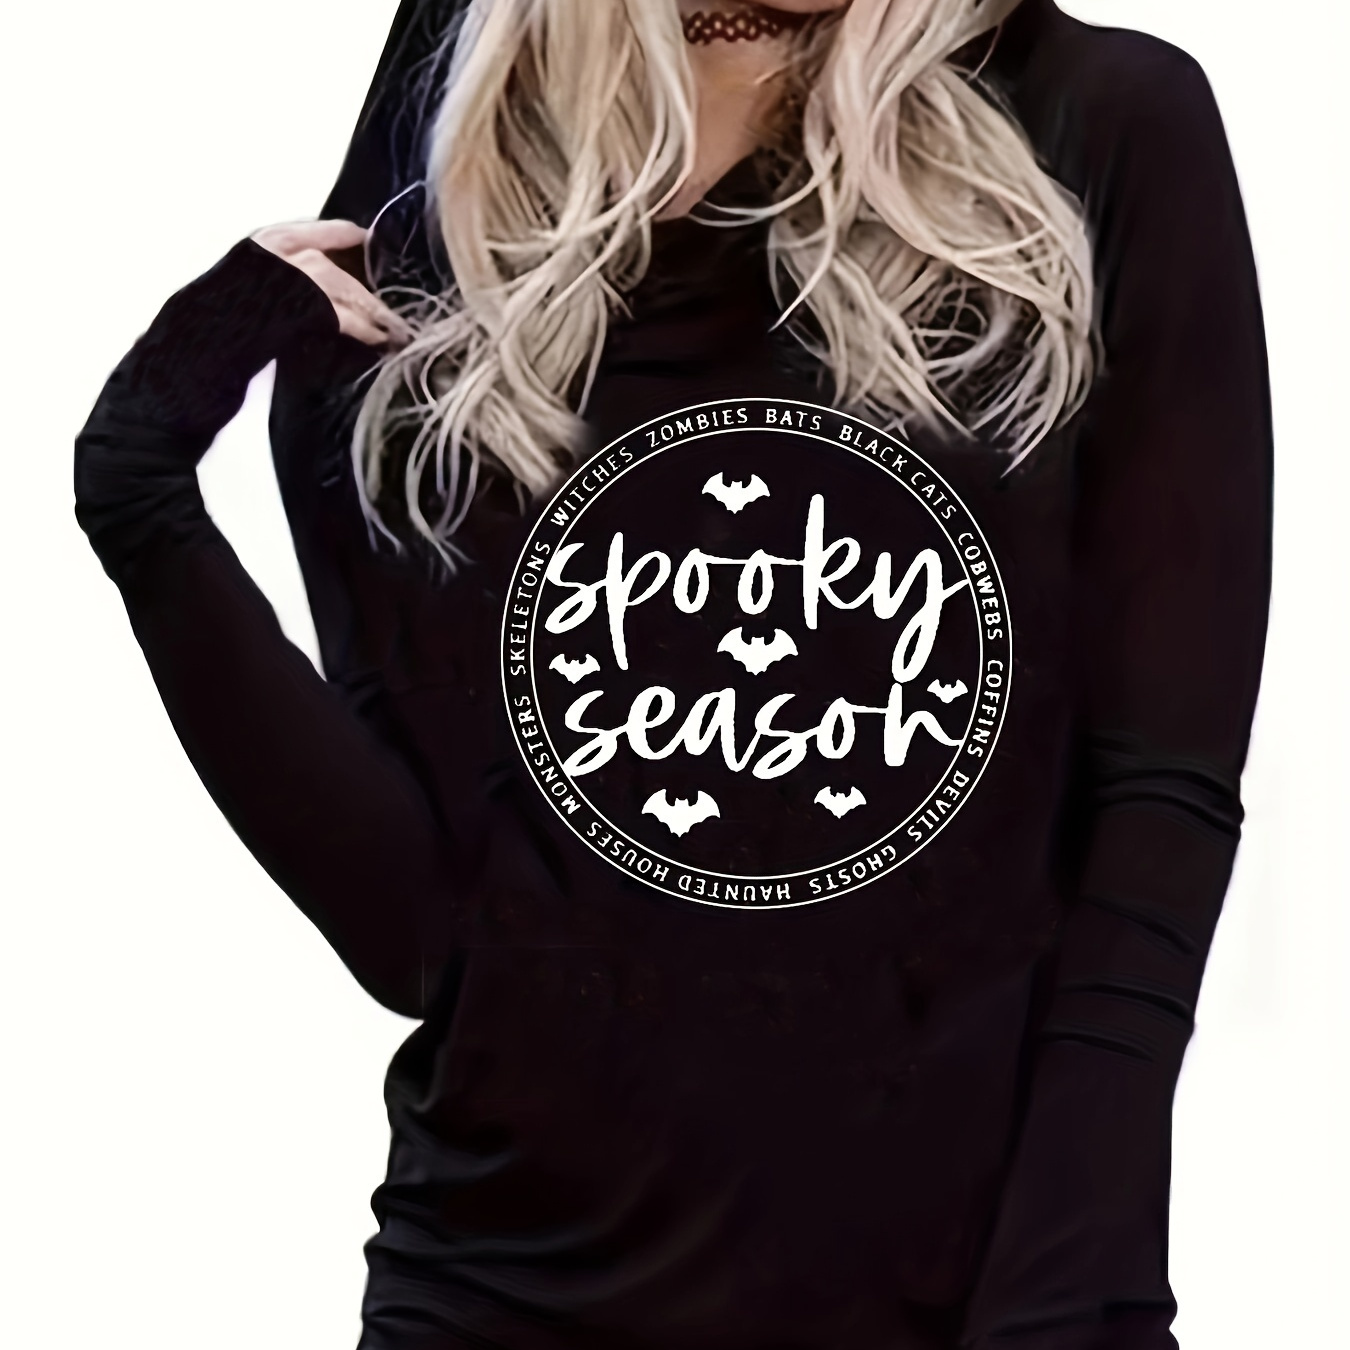 

Spooky Season Print Hooded T-shirt, Casual Long Sleeve Top For Spring & Fall, Women's Clothing